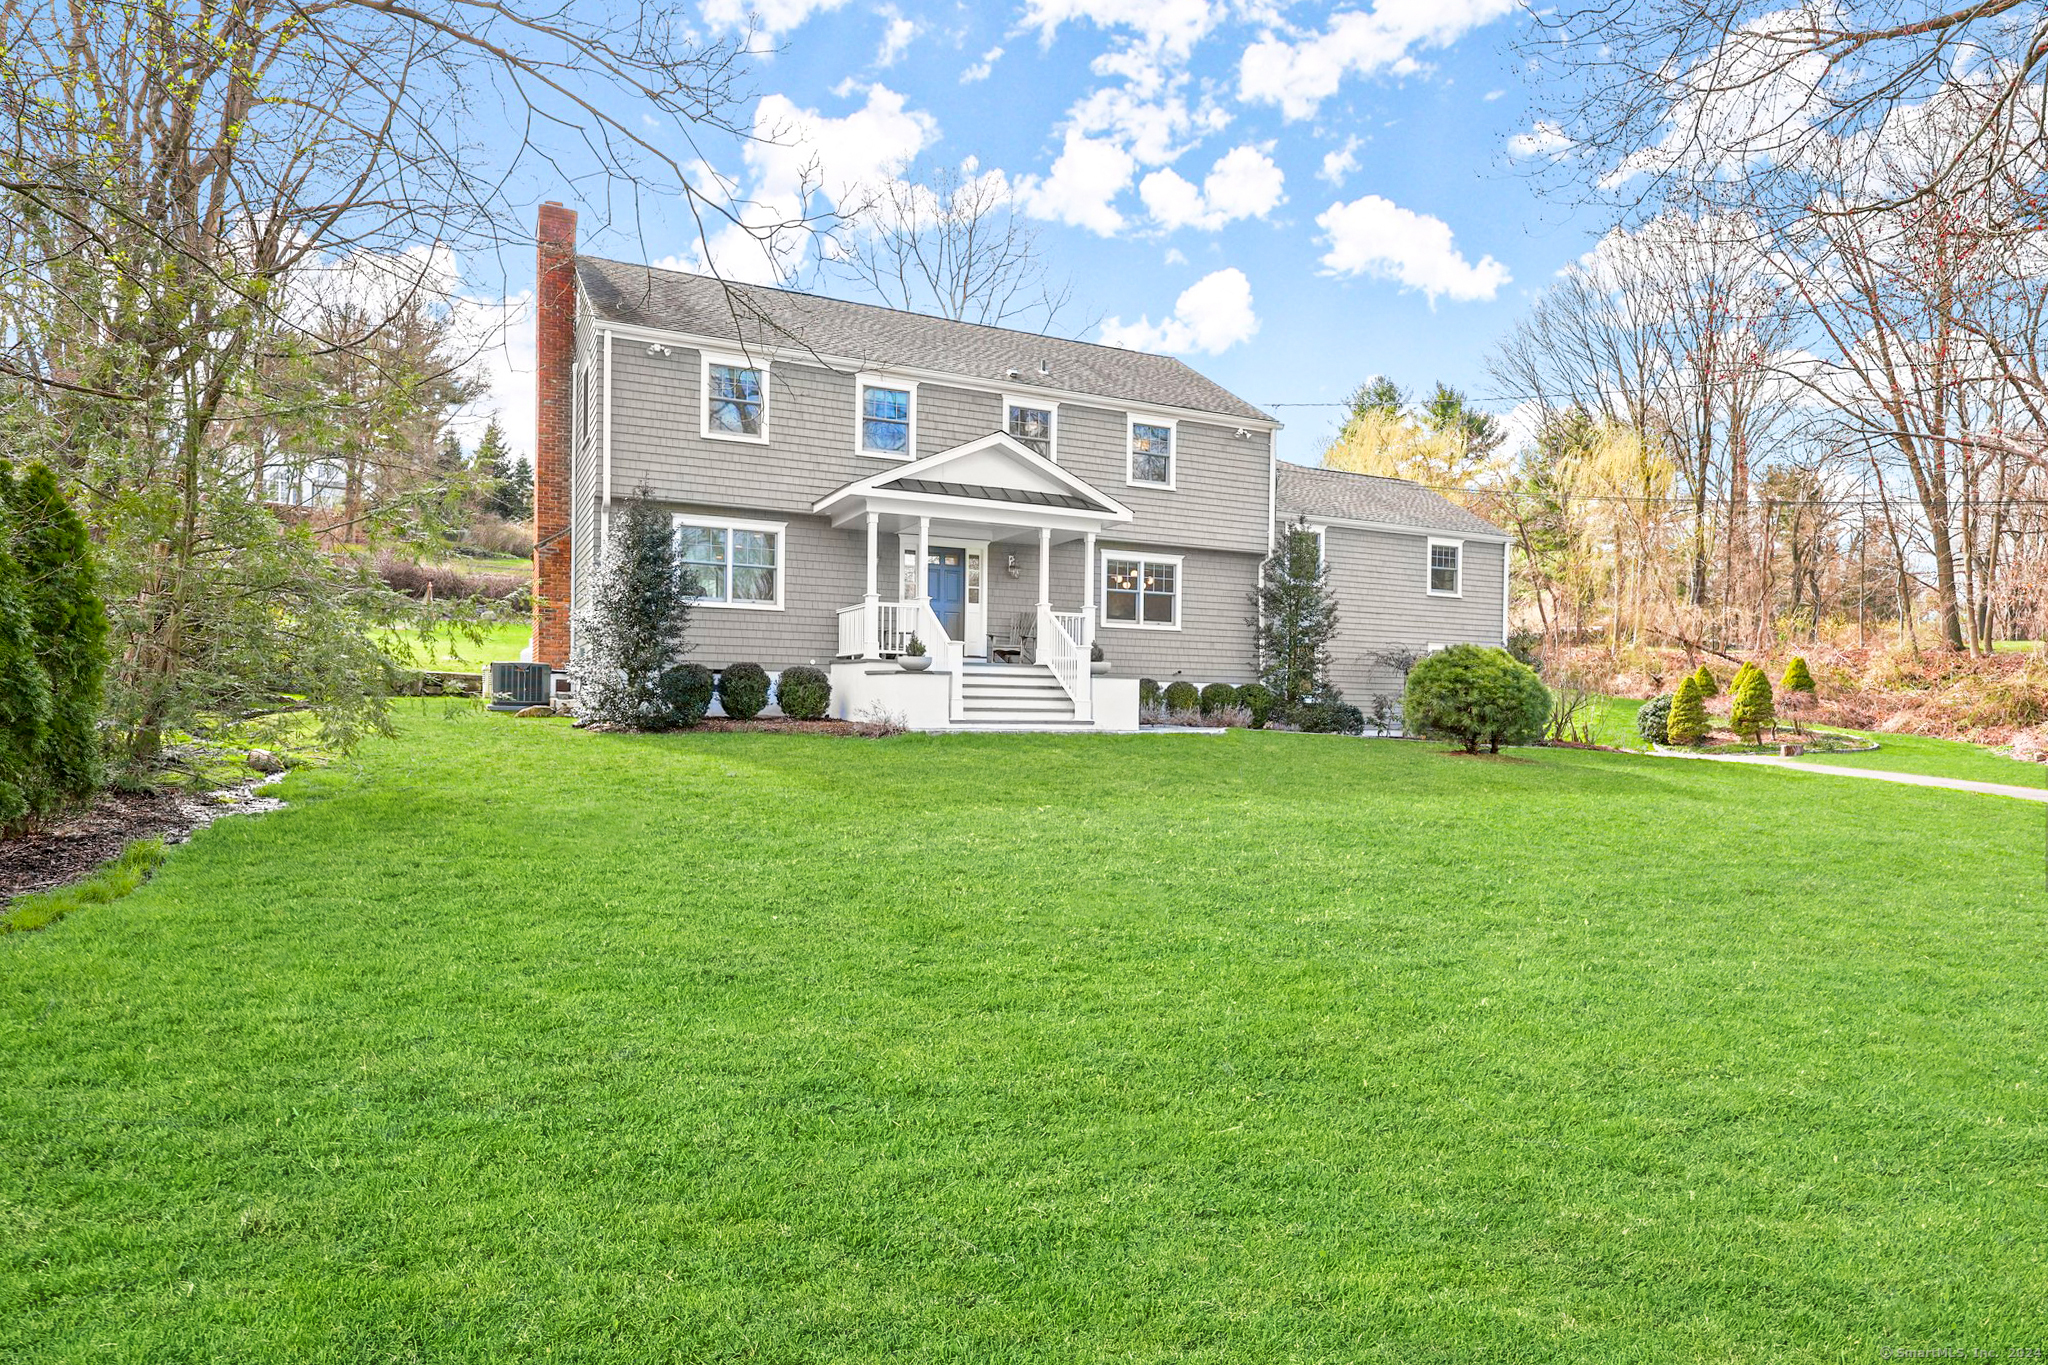 40 Siwanoy Lane, New Canaan, Connecticut - 6 Bedrooms  
4.5 Bathrooms  
11 Rooms - 